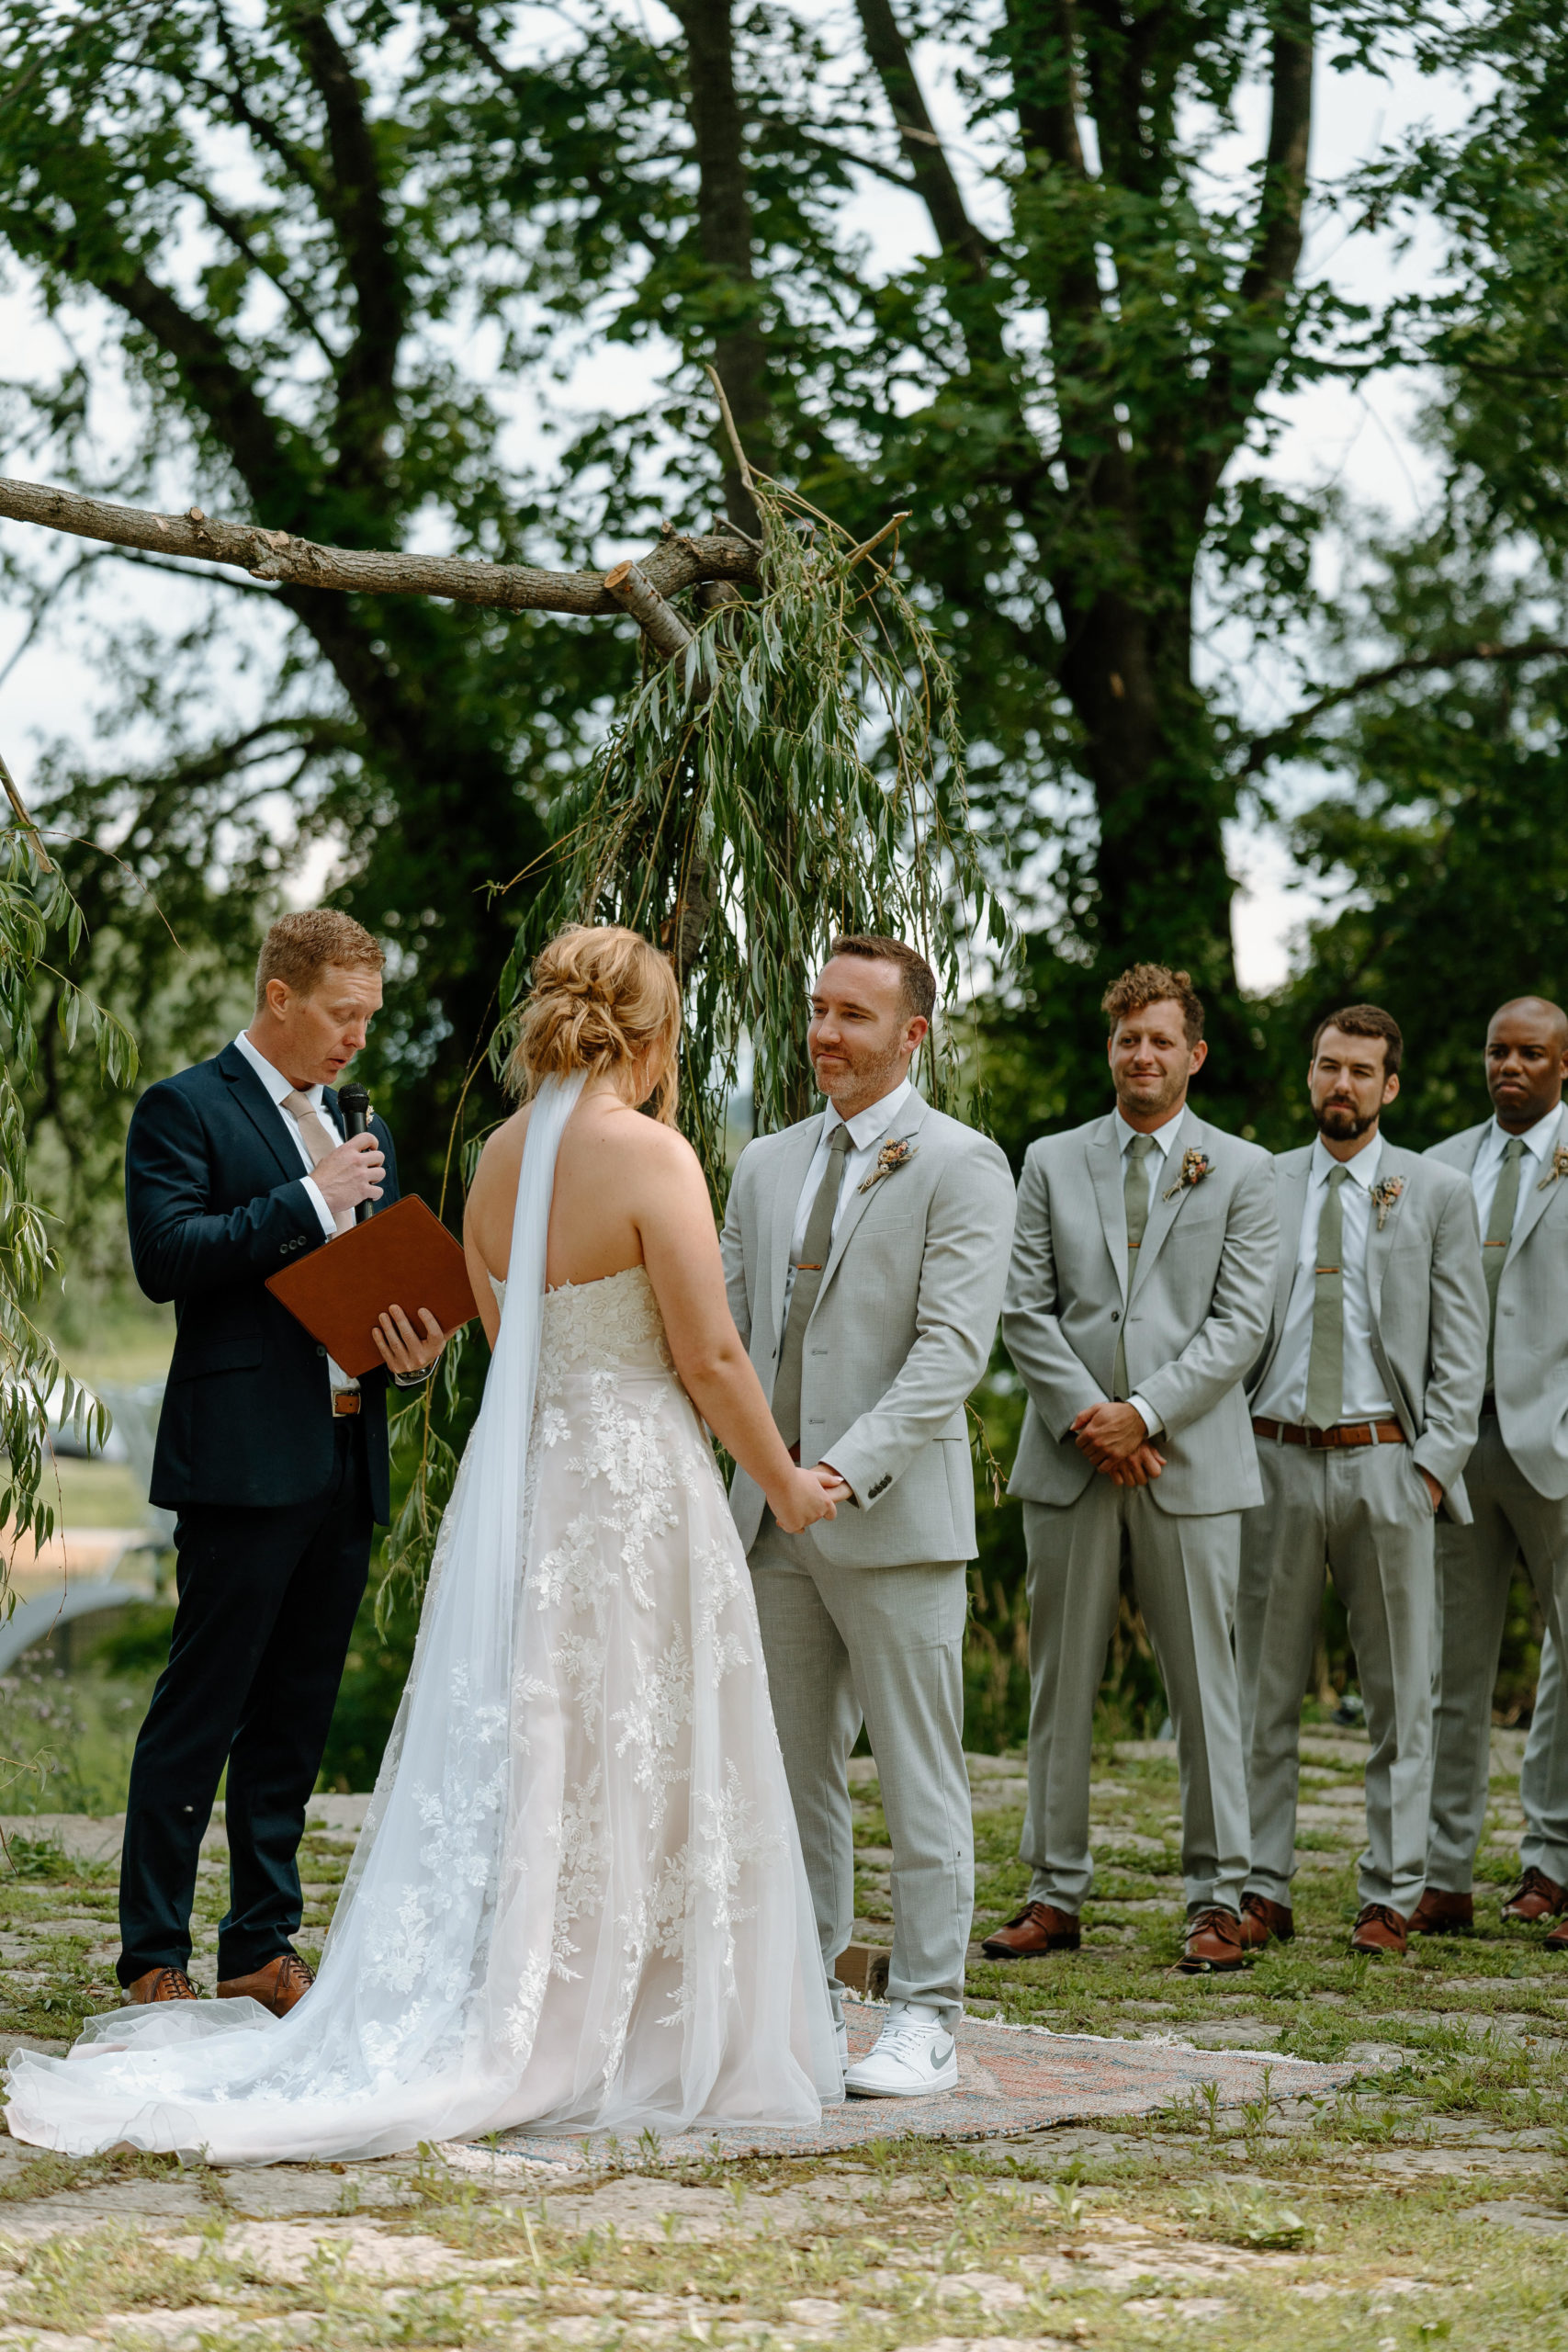 This is a wedding ceremony taking place at Indian Creek Nature Center in Cedar Rapids, IA